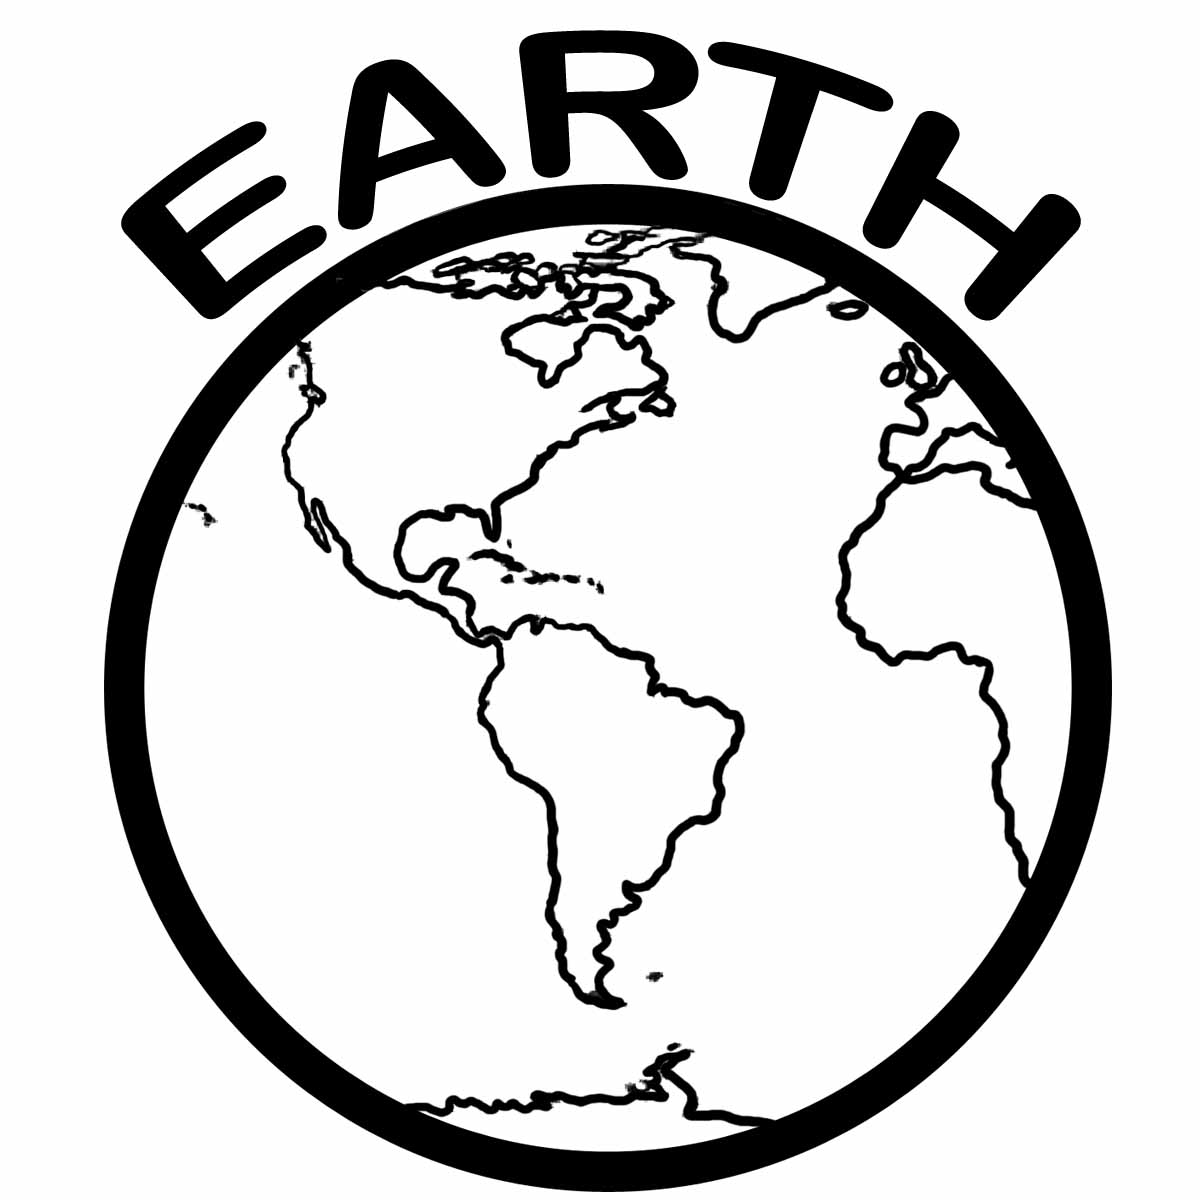 Earth Clip Art Black And White | Clipart library - Free Clipart Images